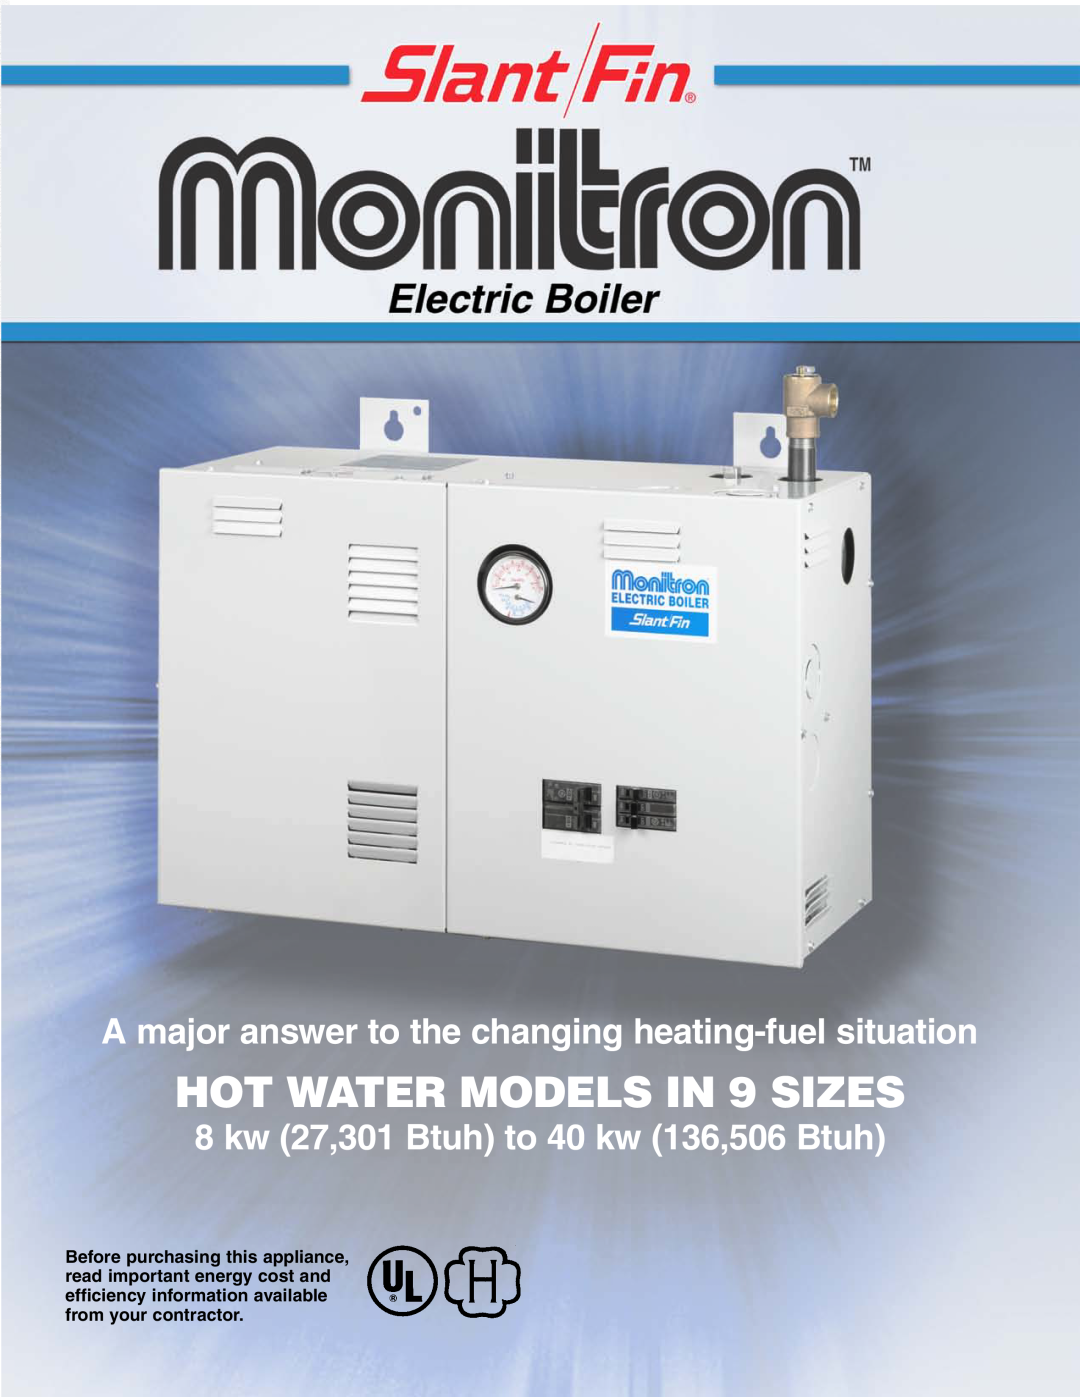 Slant/Fin Monitron EH Boilers manual HOT WATER MODELS IN 9 SIZES, 8 kw 27,301 Btuh to 40 kw 136,506 Btuh 